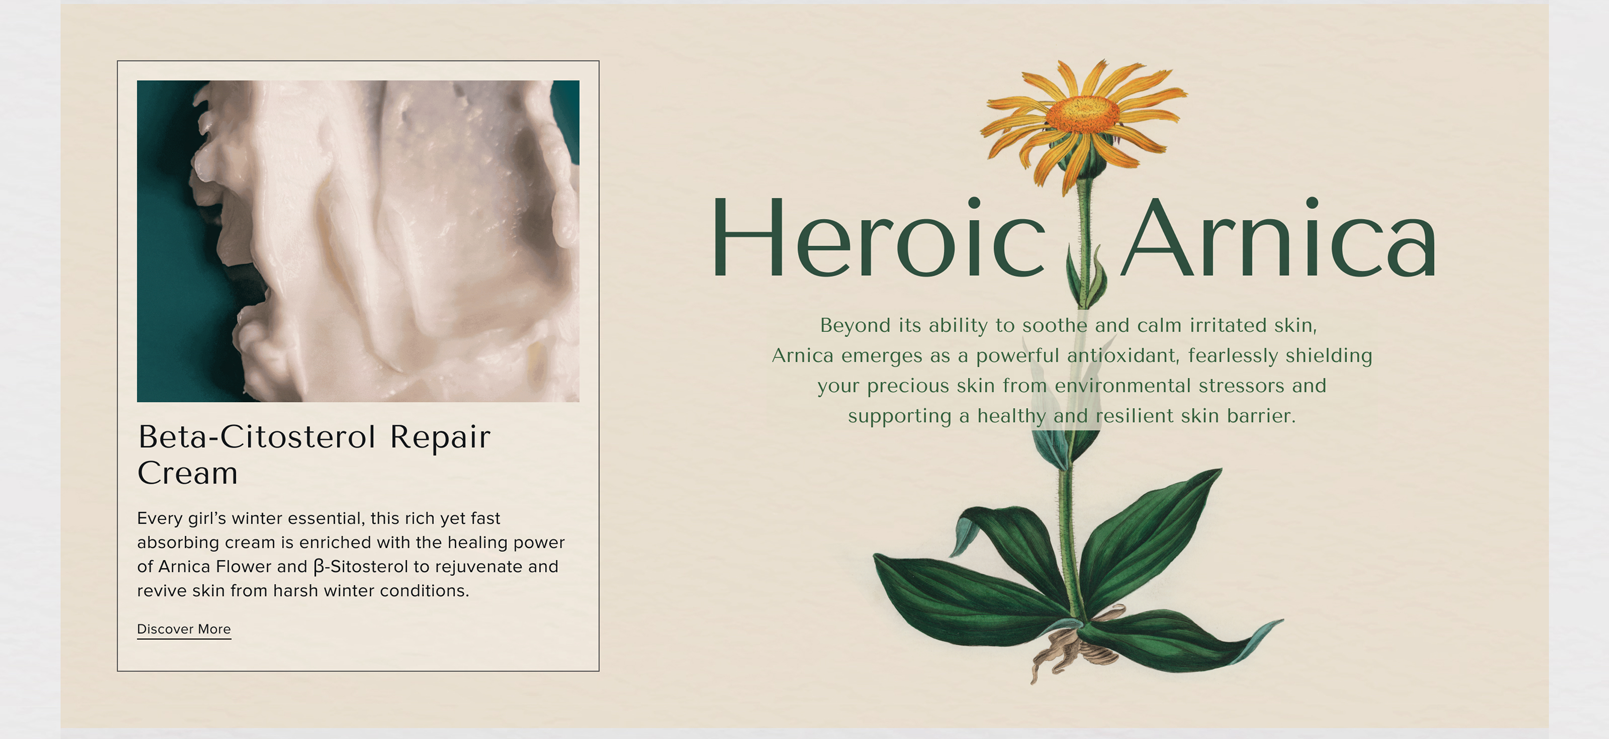 Heroic Arnica Beyond its ability to soothe and calm irritated skin, Arnica emerges as a powerful antioxidant, fearlessly shielding your precious skin from environmental stressors and supporting a healthy and resilient skin barrier. - Beta-Citosterol Repair Cream